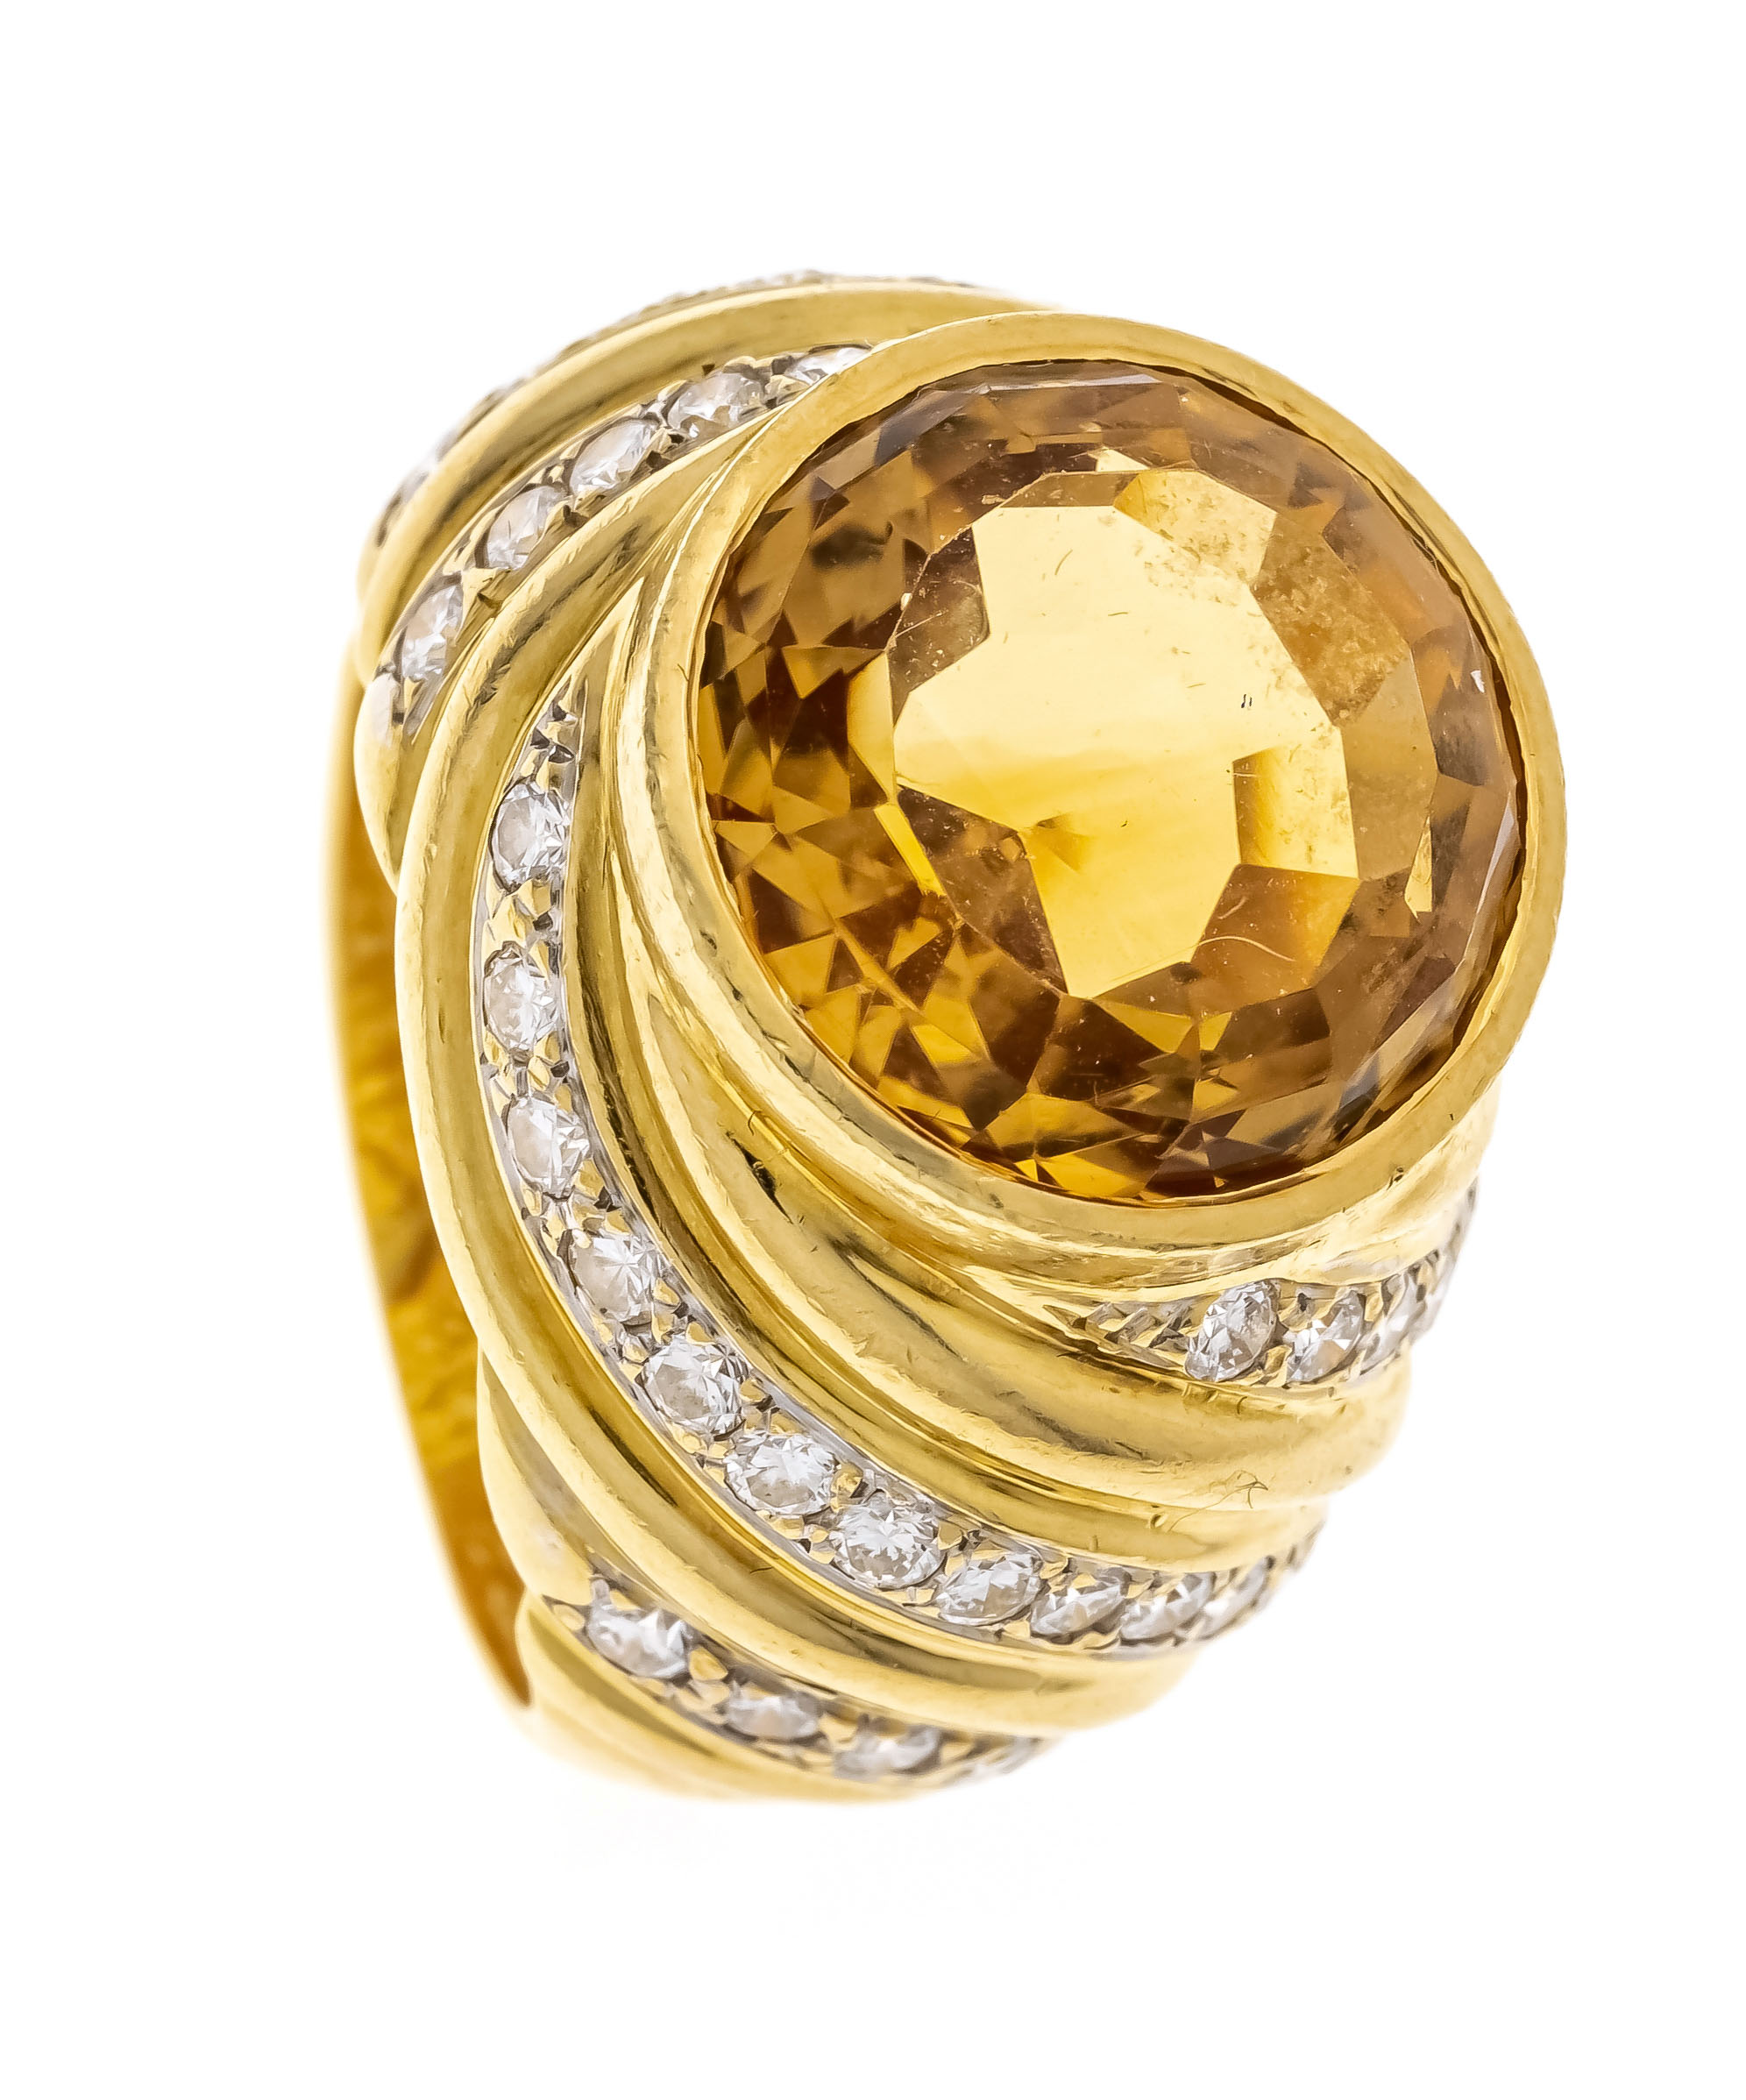 Citrine-cut diamond ring GG 750/000 with one round faceted citrine 13.5 mm, brownish yellow-